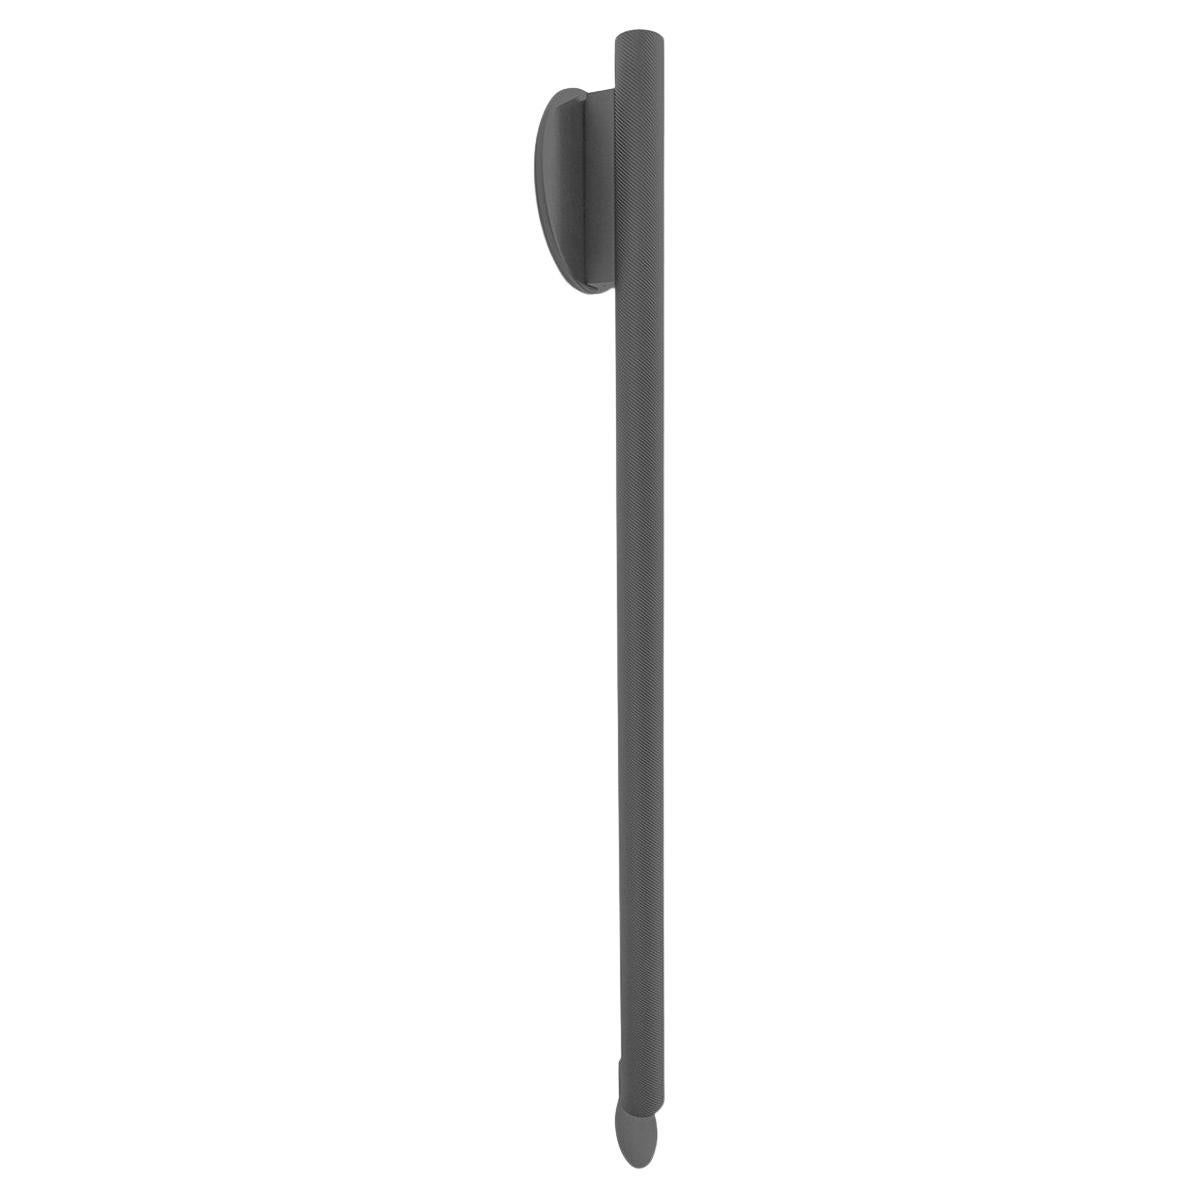 Flos Flauta Spiga Large Indoor/Outdoor Wall Sconce in Anthracite